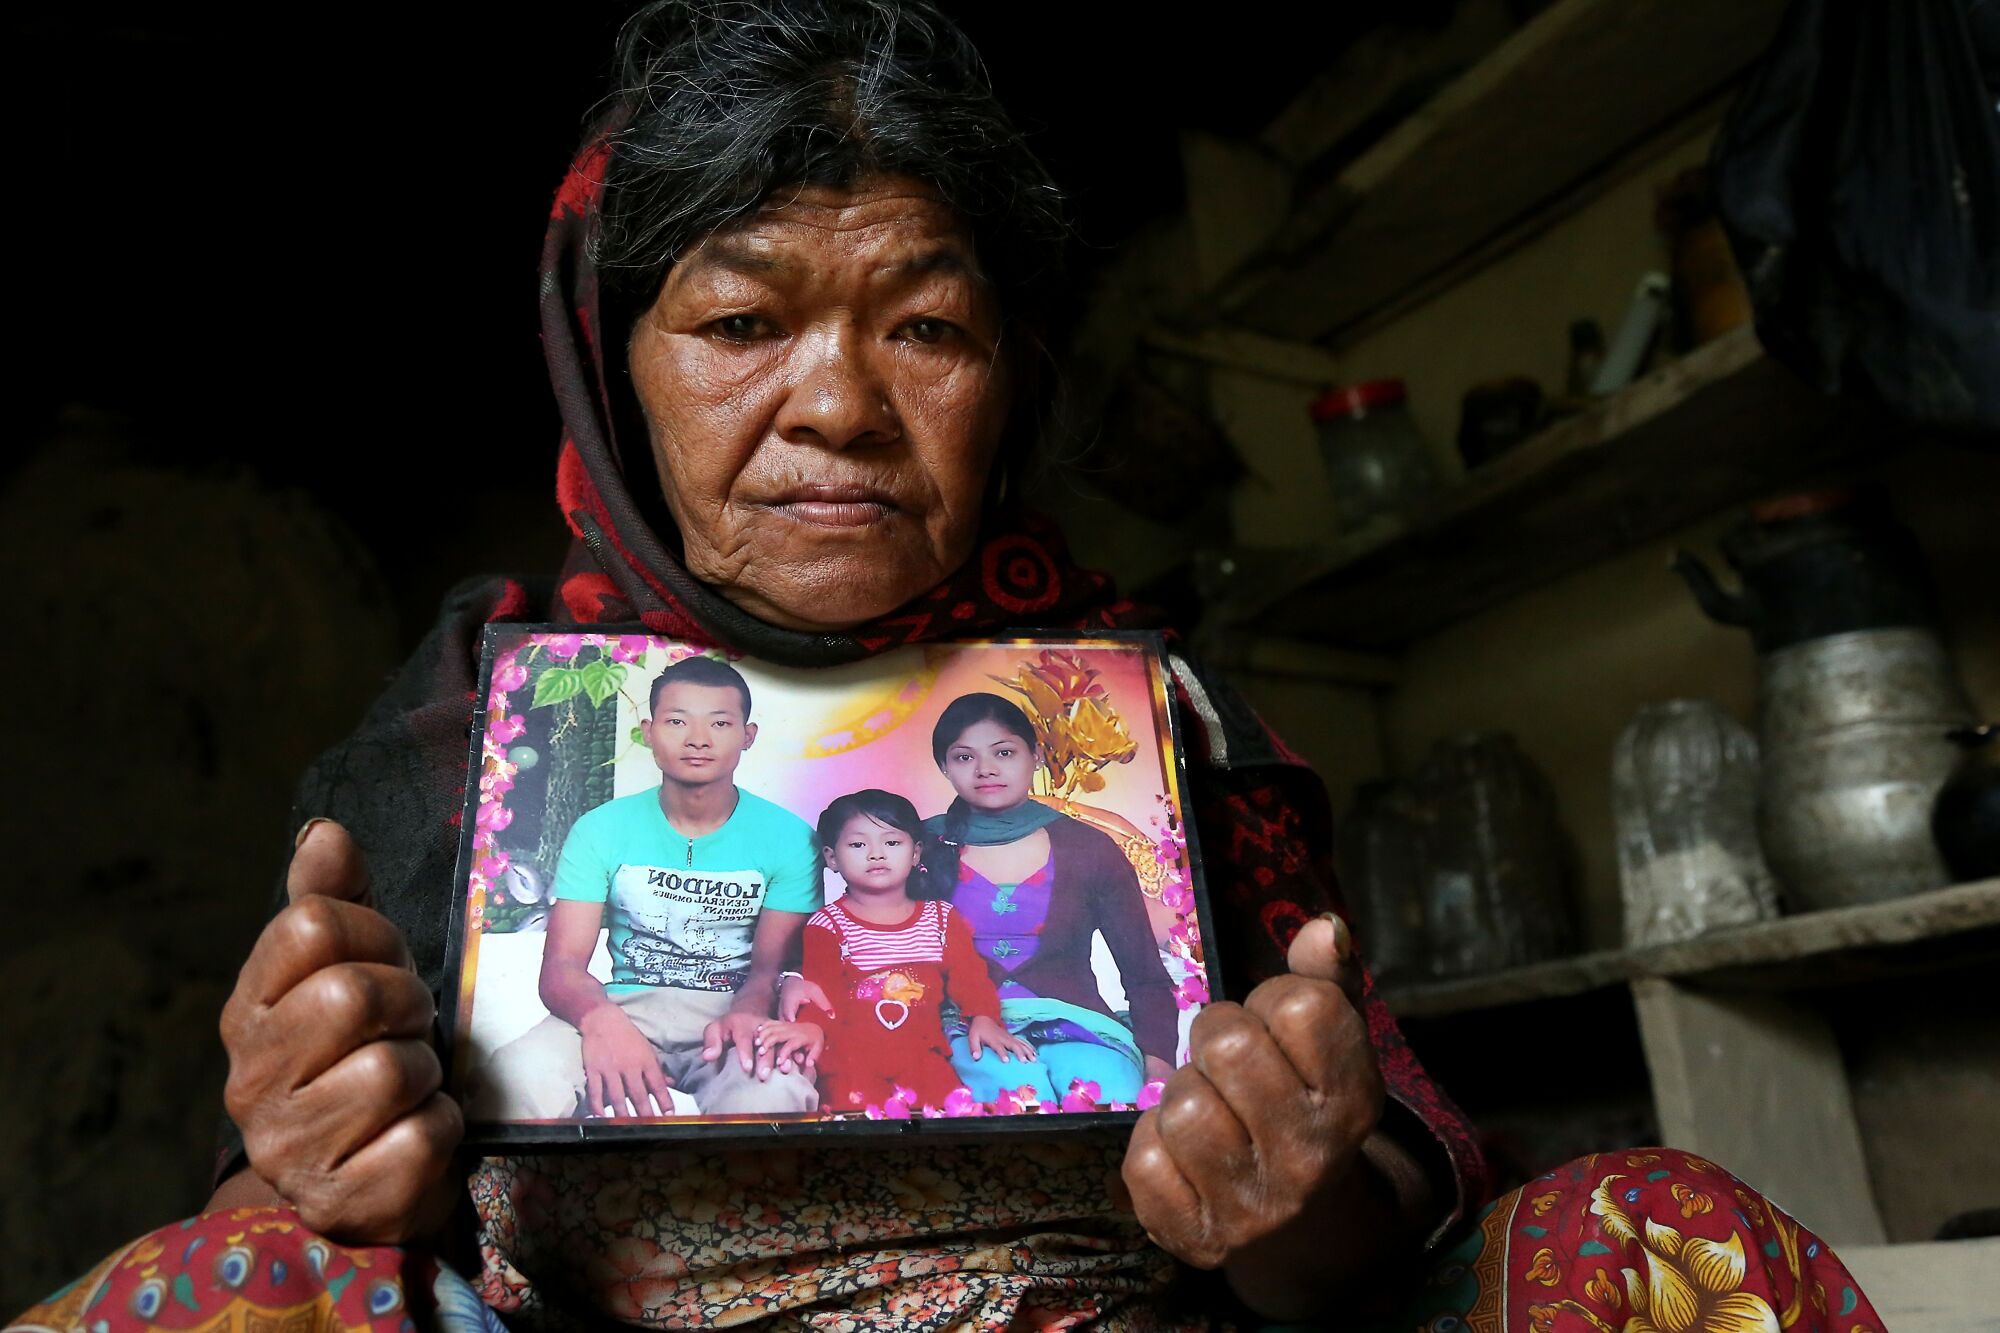 Subitra Bhandari, crouching in her one-room home where she lives alone, holds a photo of her son Tejendra and family.